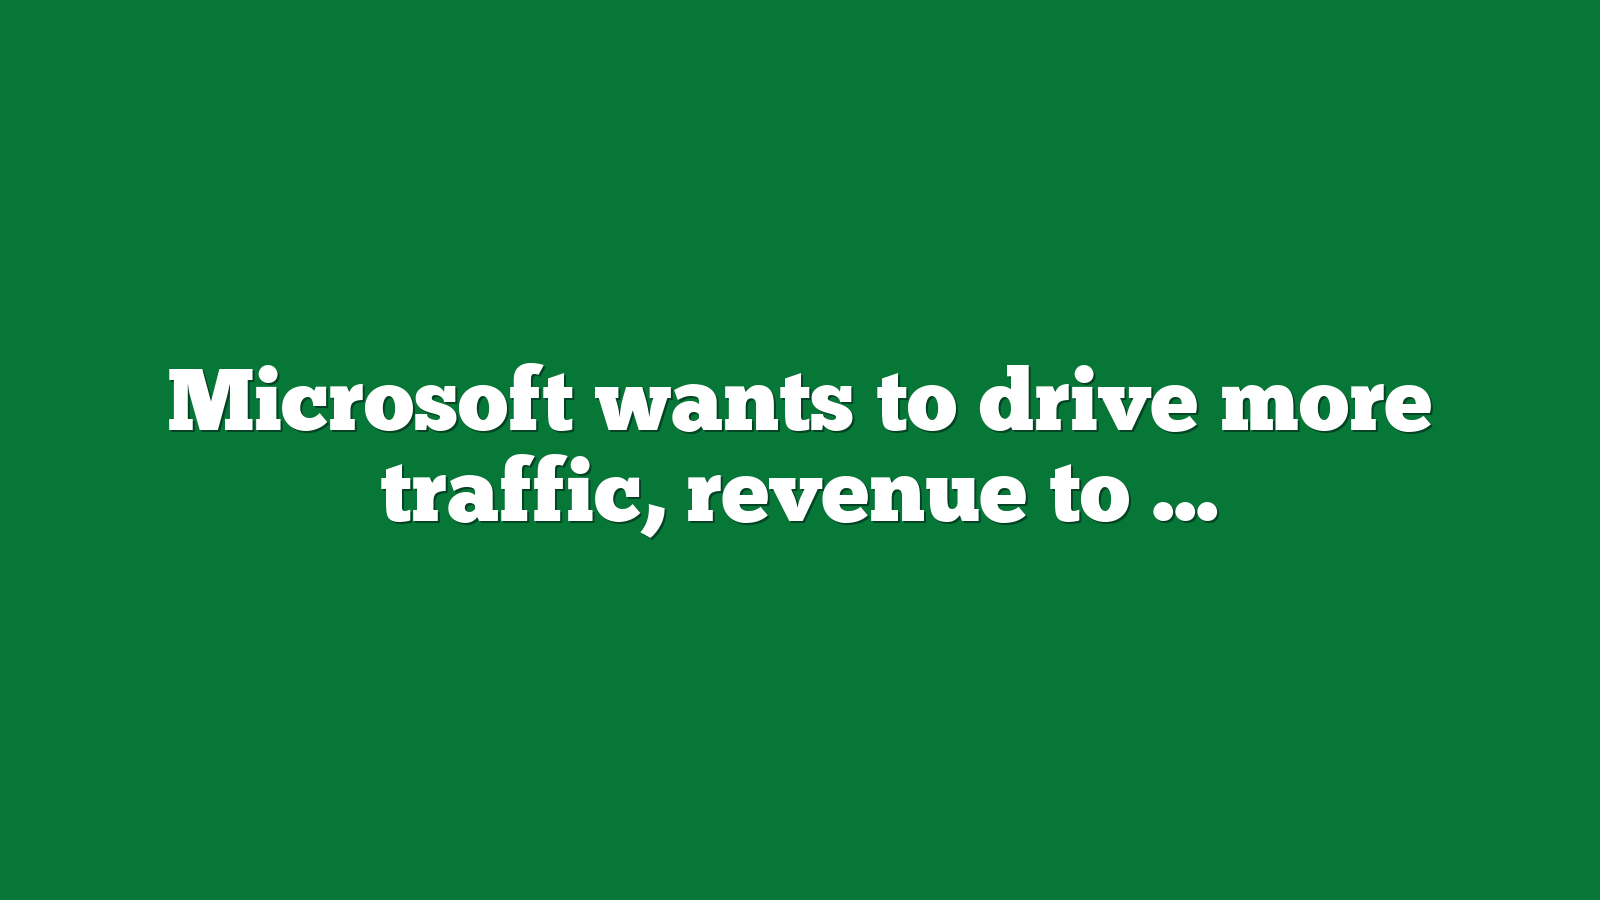 Microsoft wants to drive more traffic, revenue to publishers